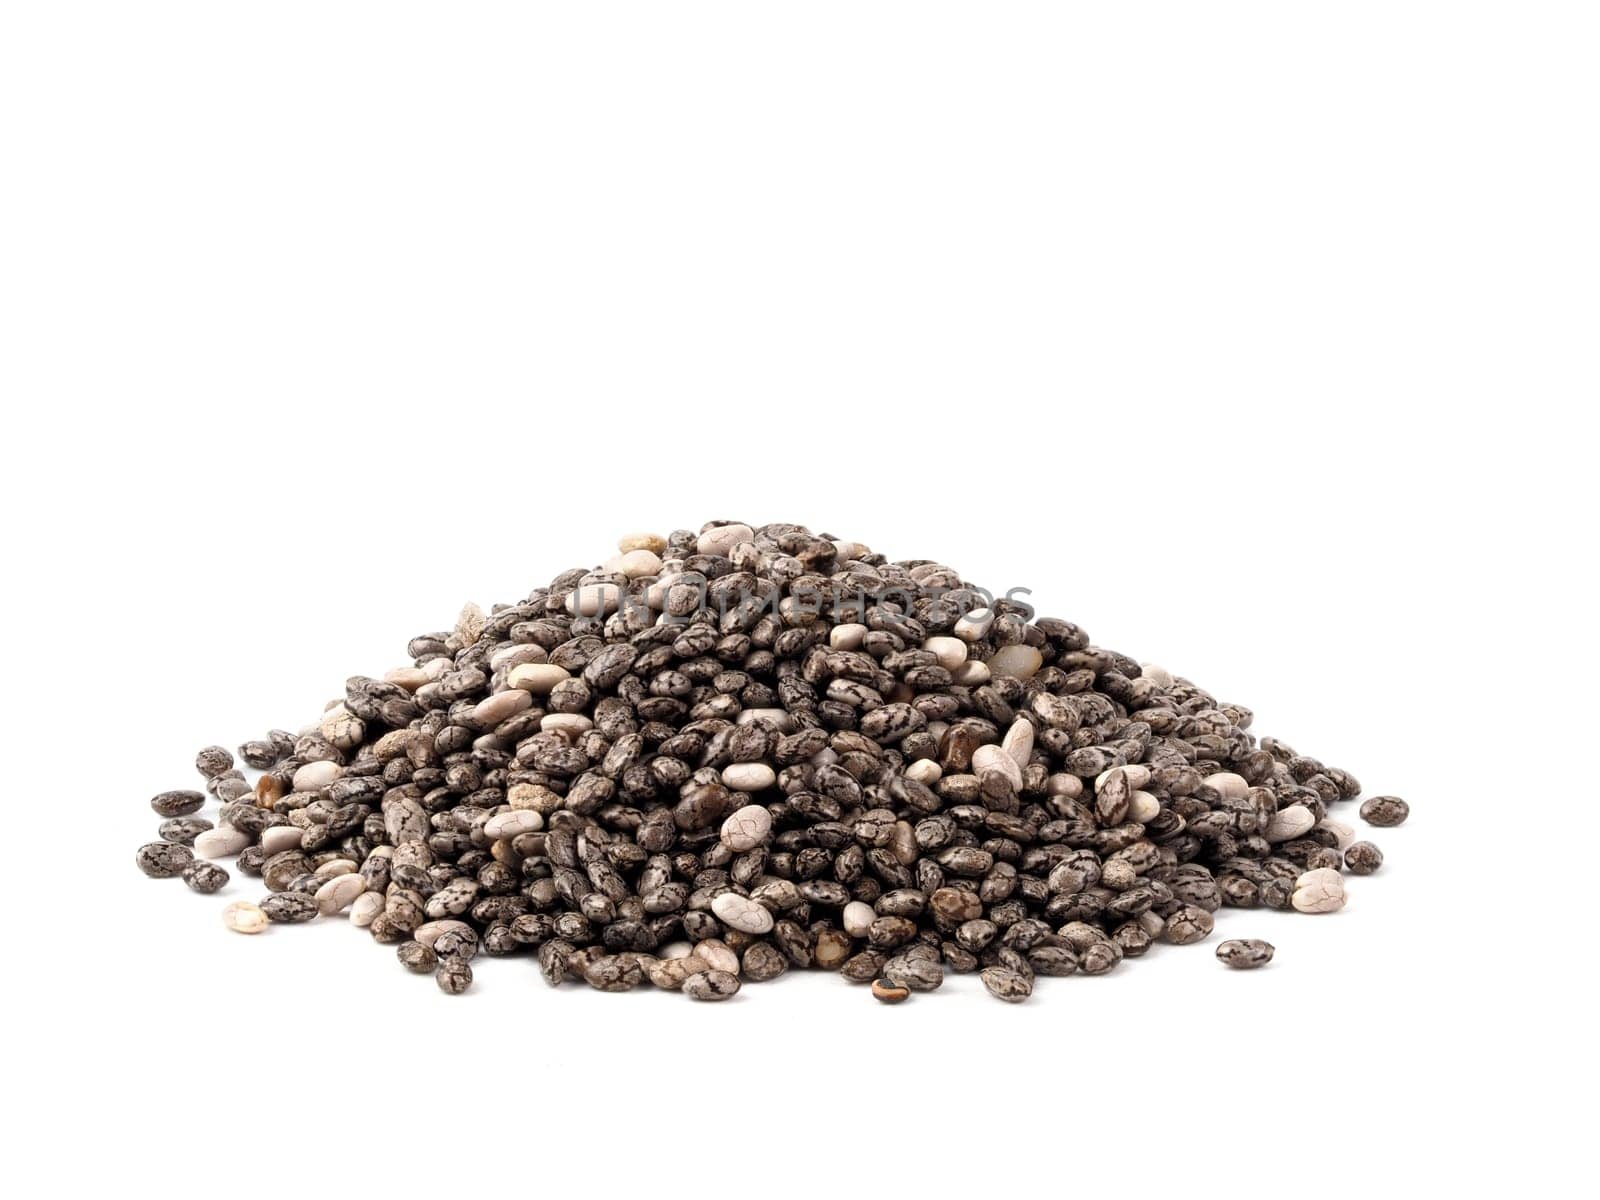 chia seeds on white background by fascinadora